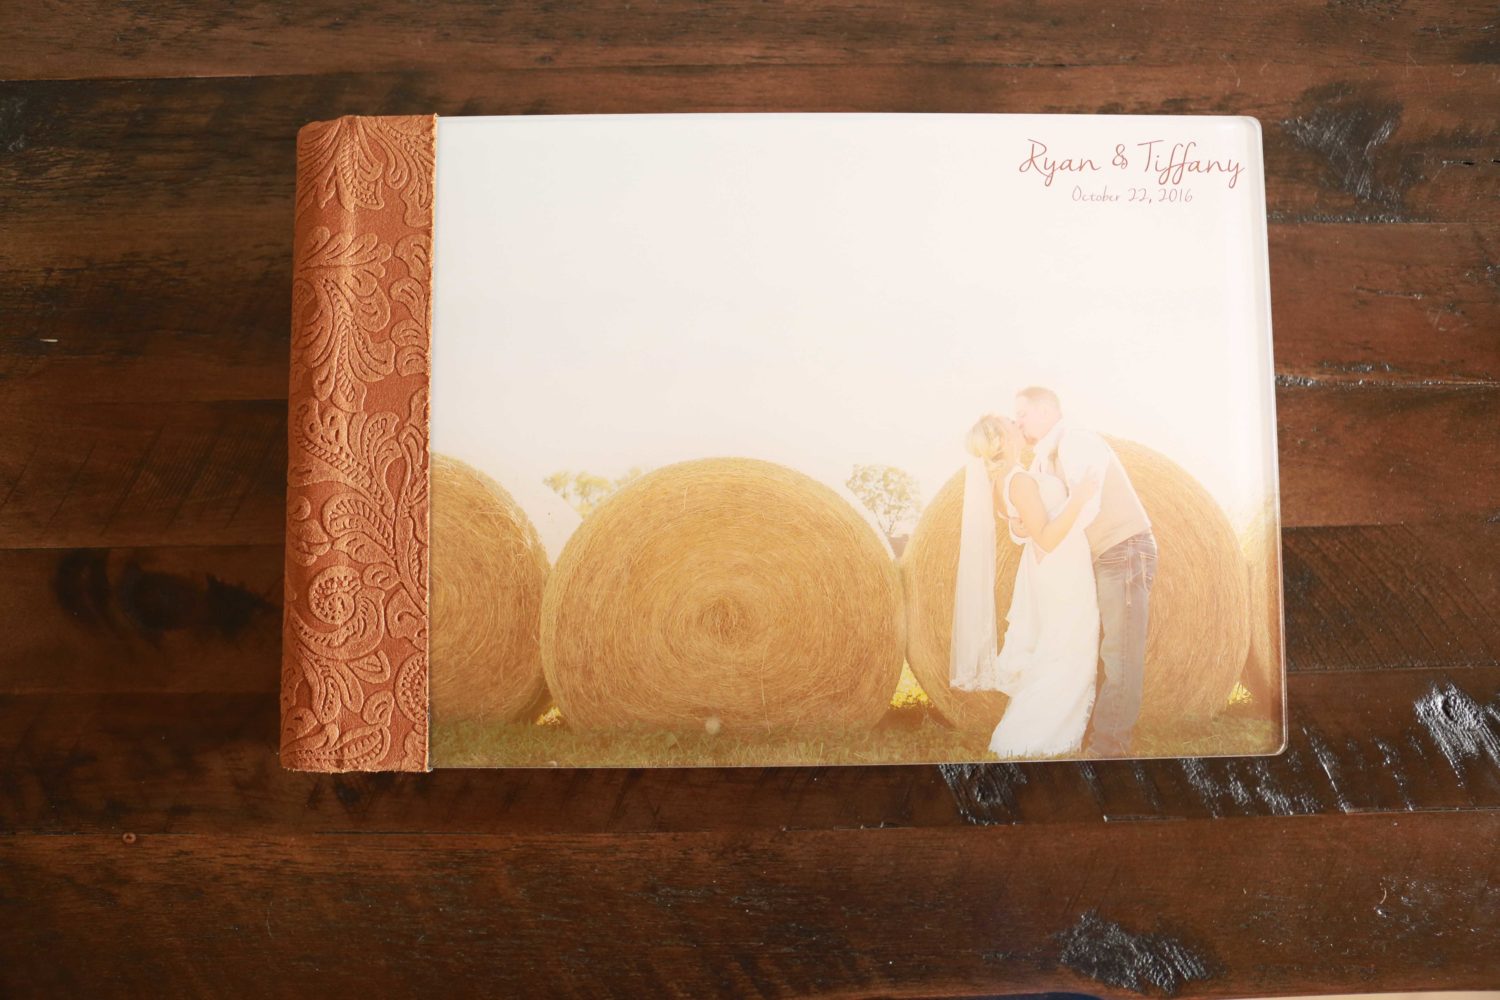 Handcrafted album detail photo by simply grace photography